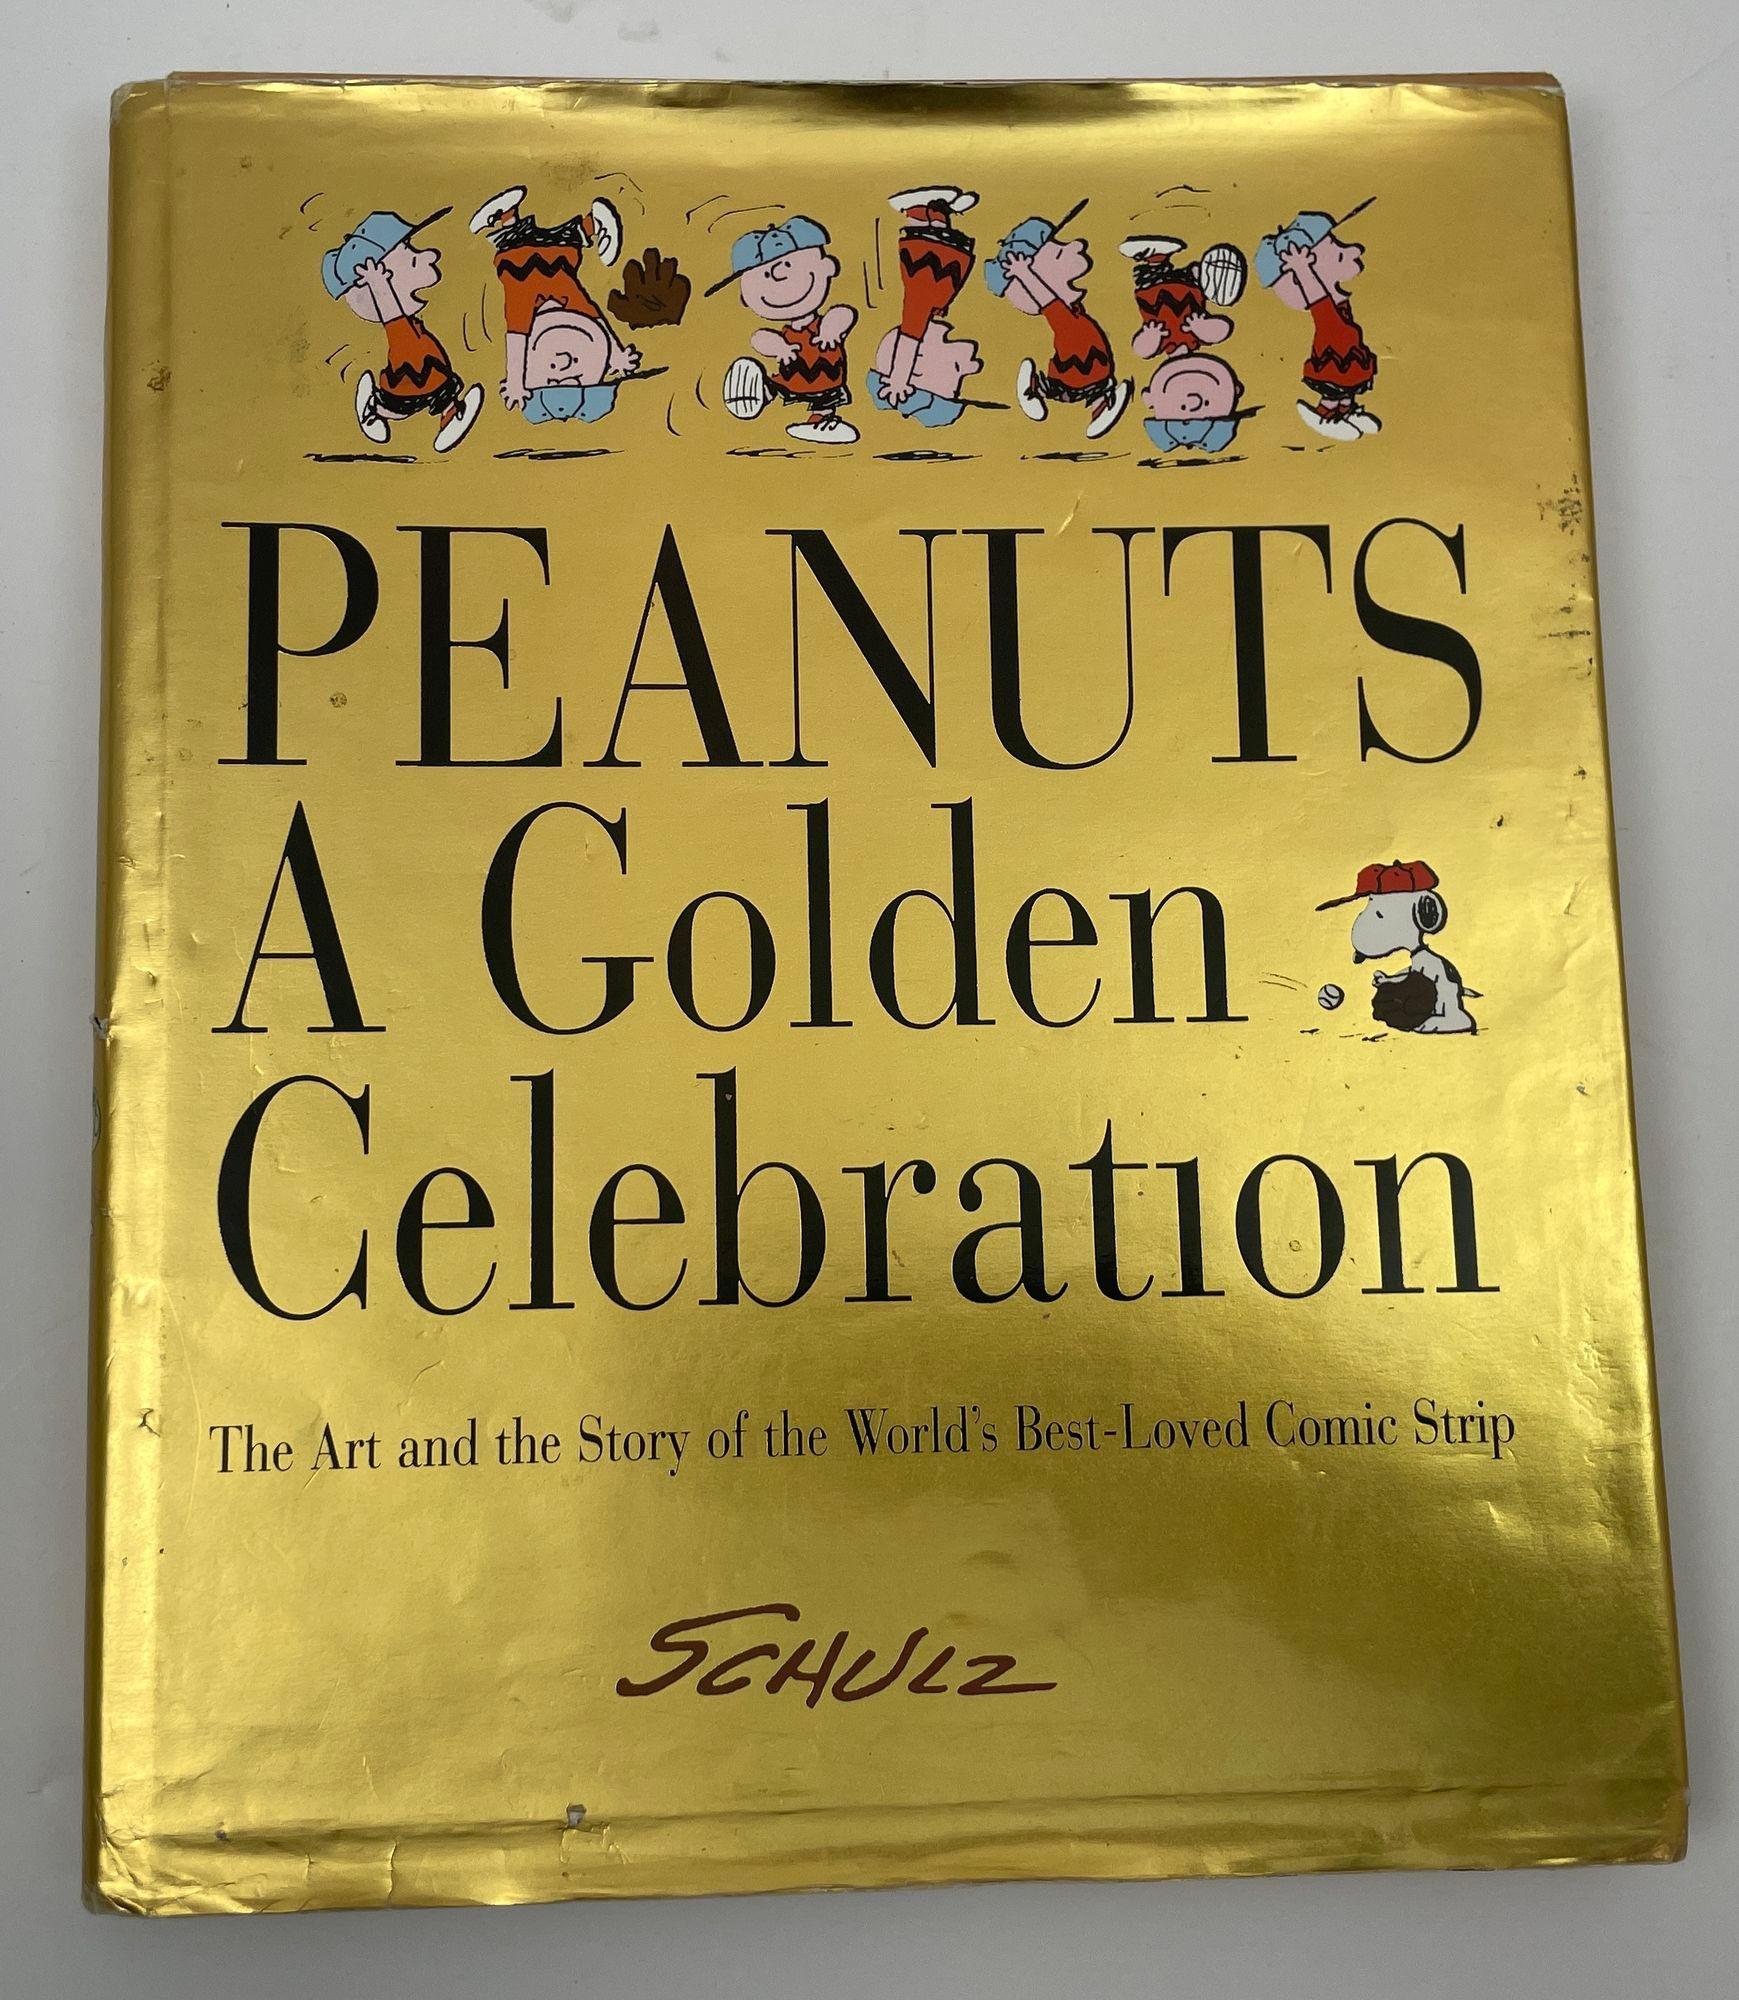 A Golden Celebration : the Art and the Story of the World's Best-loved Comic Strip Hardcover Book.
Charles Monroe Schulz.
Large Hardcover Comic books, strips.
Publisher ‏ : ‎ Harper Collins Publishers (January 1, 1990).
Language ‏ : ‎